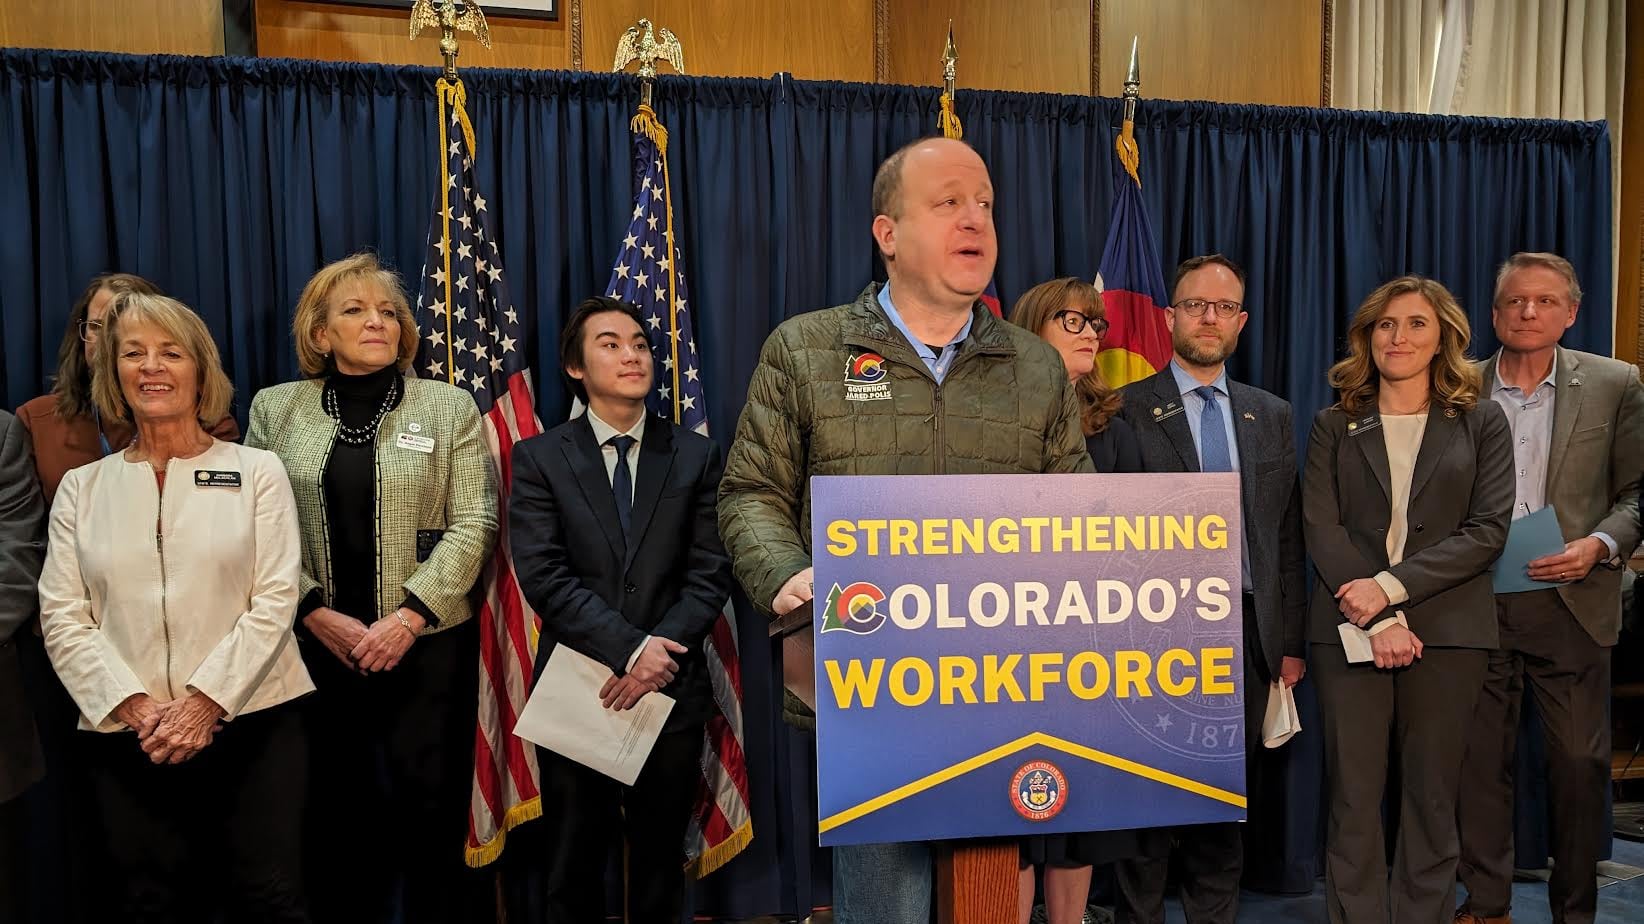 A man wearing a green jacket stands at a podium with a sign that reads "Strengthening Colorado's workforce." There is a group of people standing in a row with flags in the background.